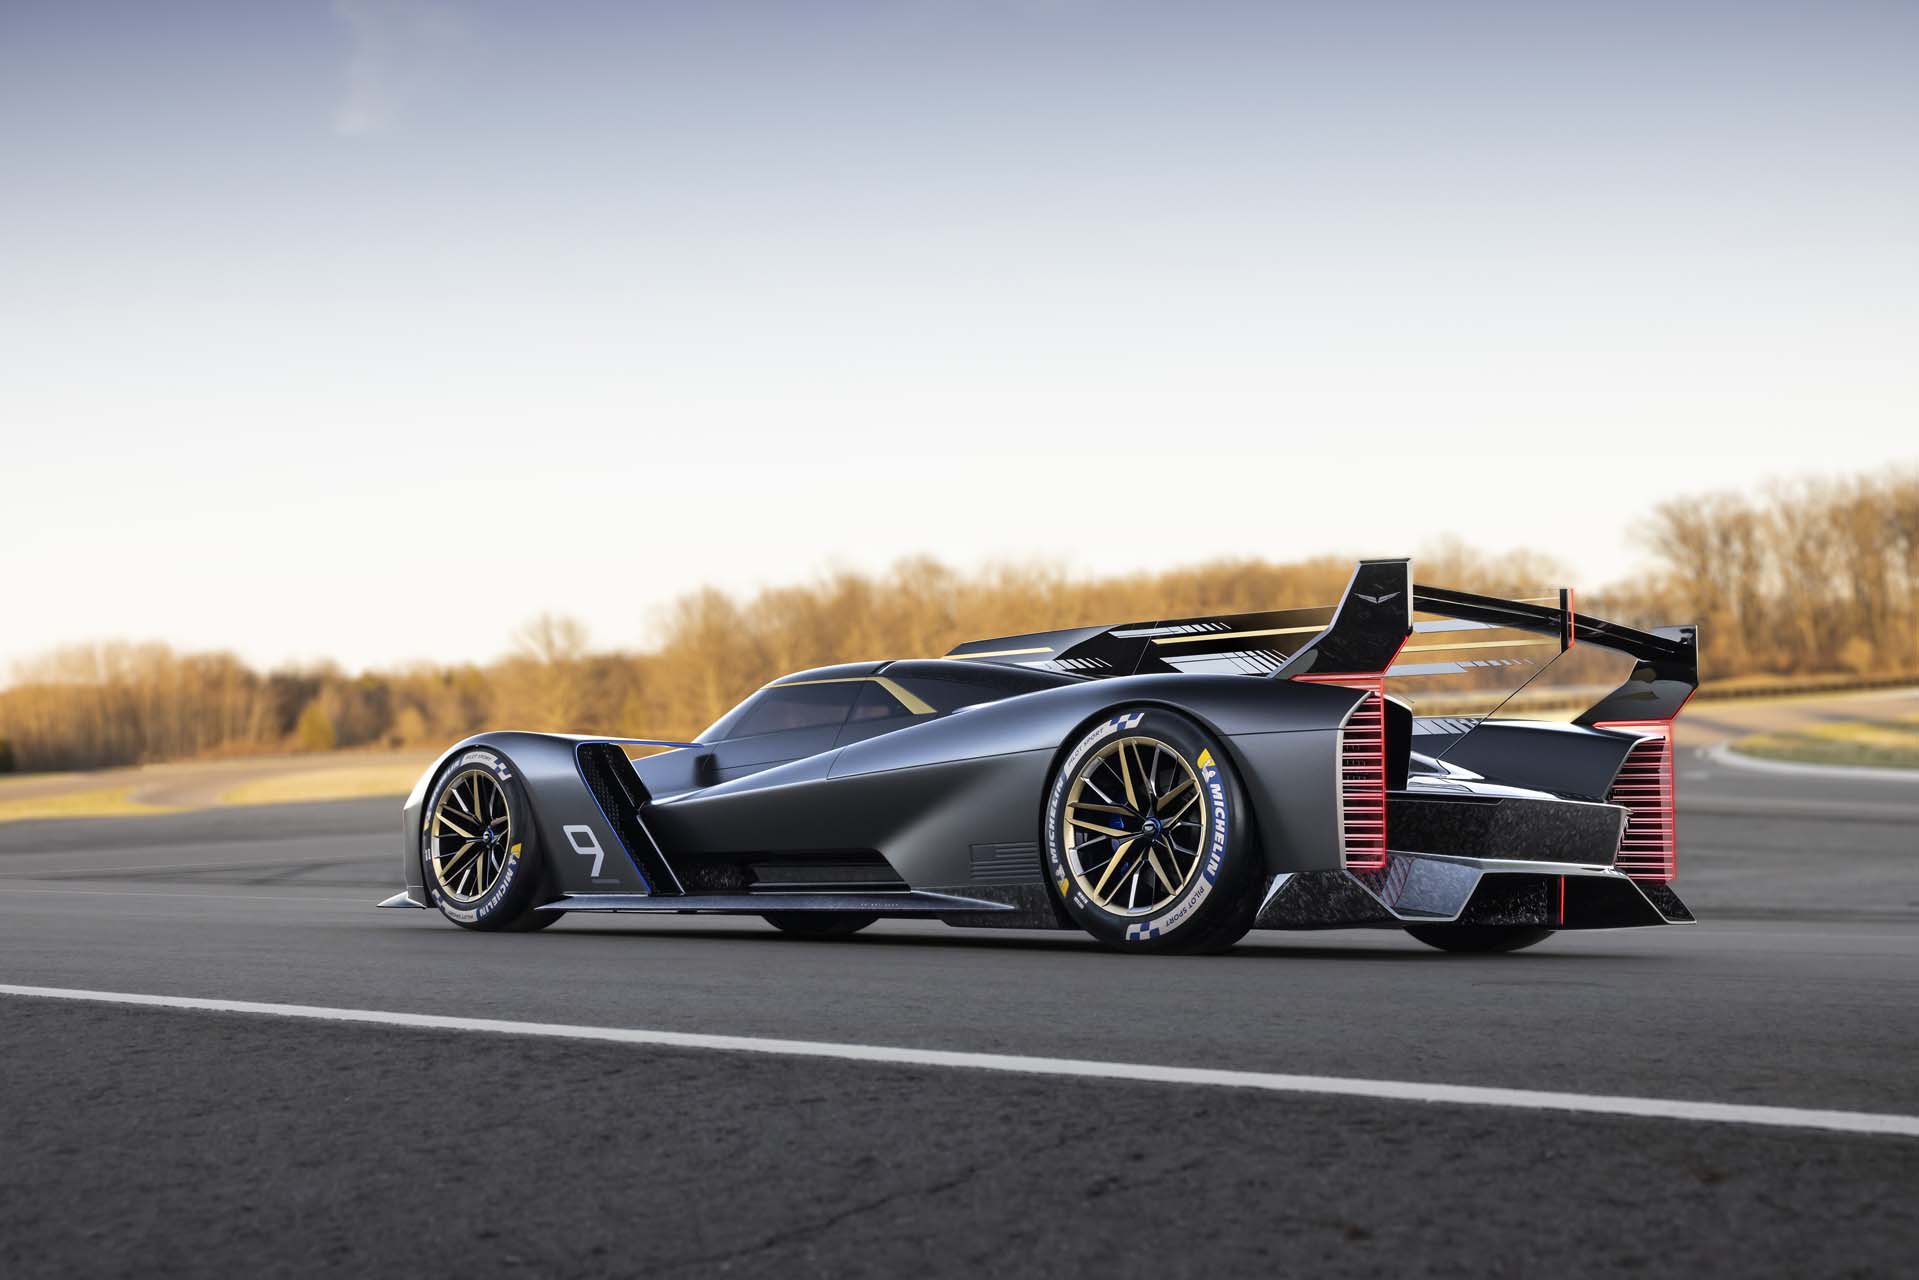 Cadillac Project GTP Hypercar revealed with aerodynamic design